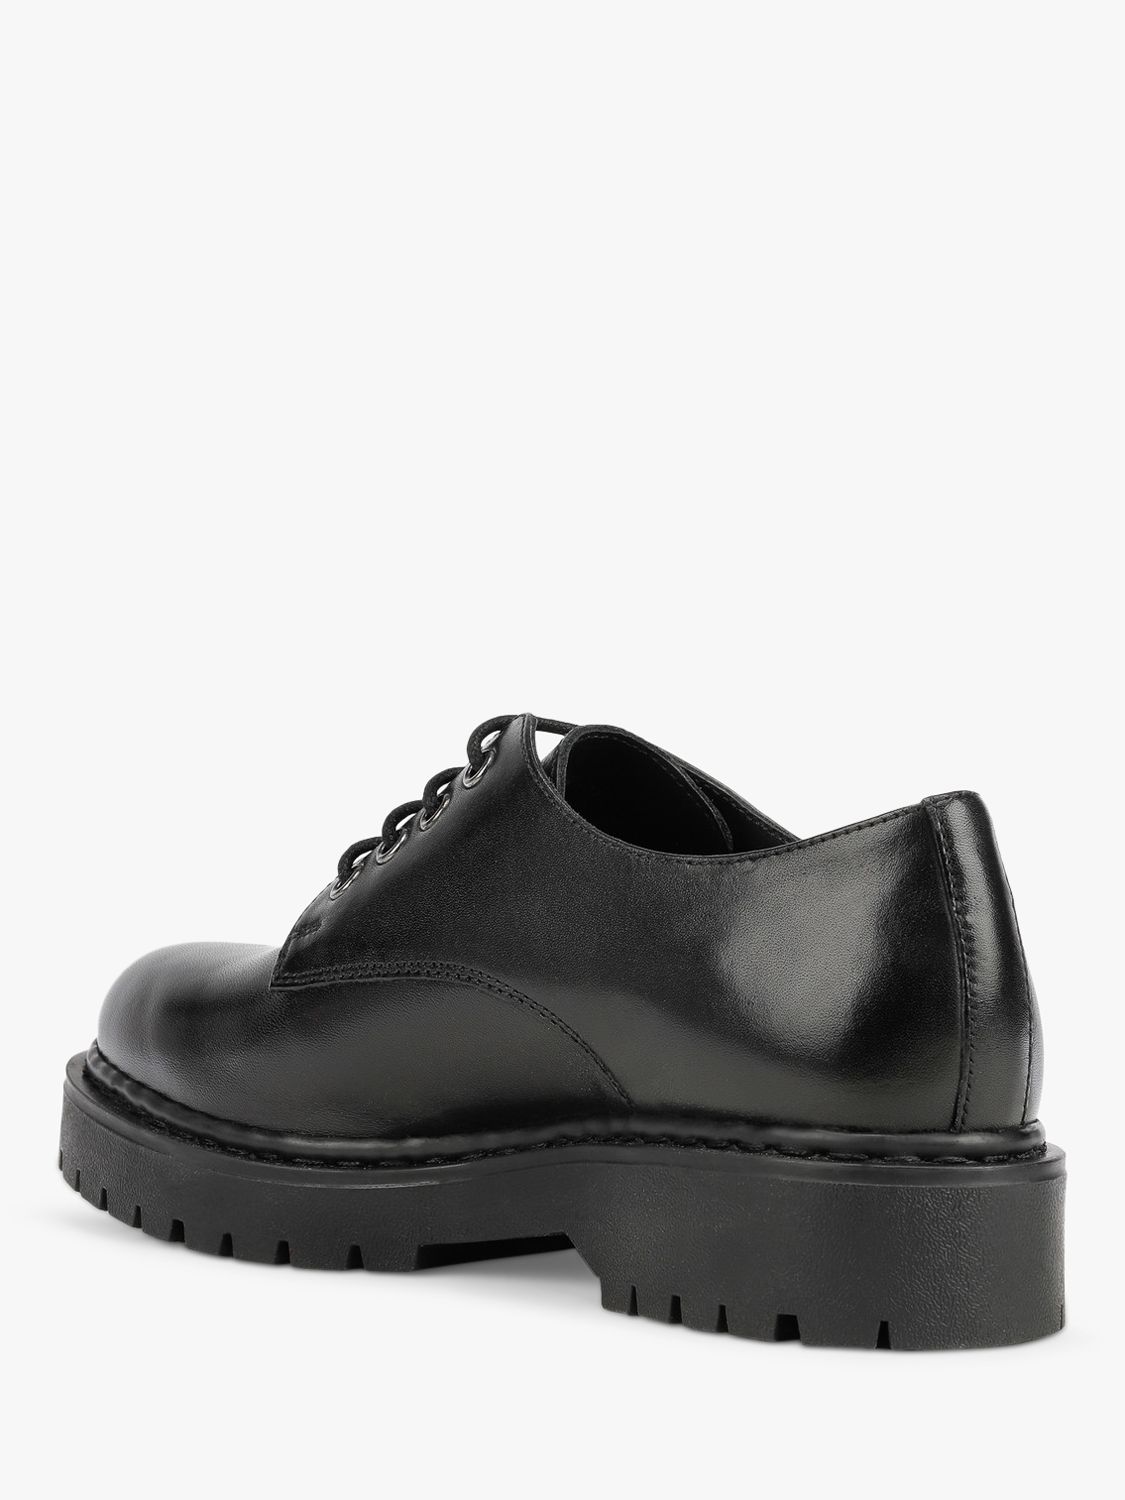 Geox Women's Bleyze Leather Brogues, Black at John Lewis & Partners